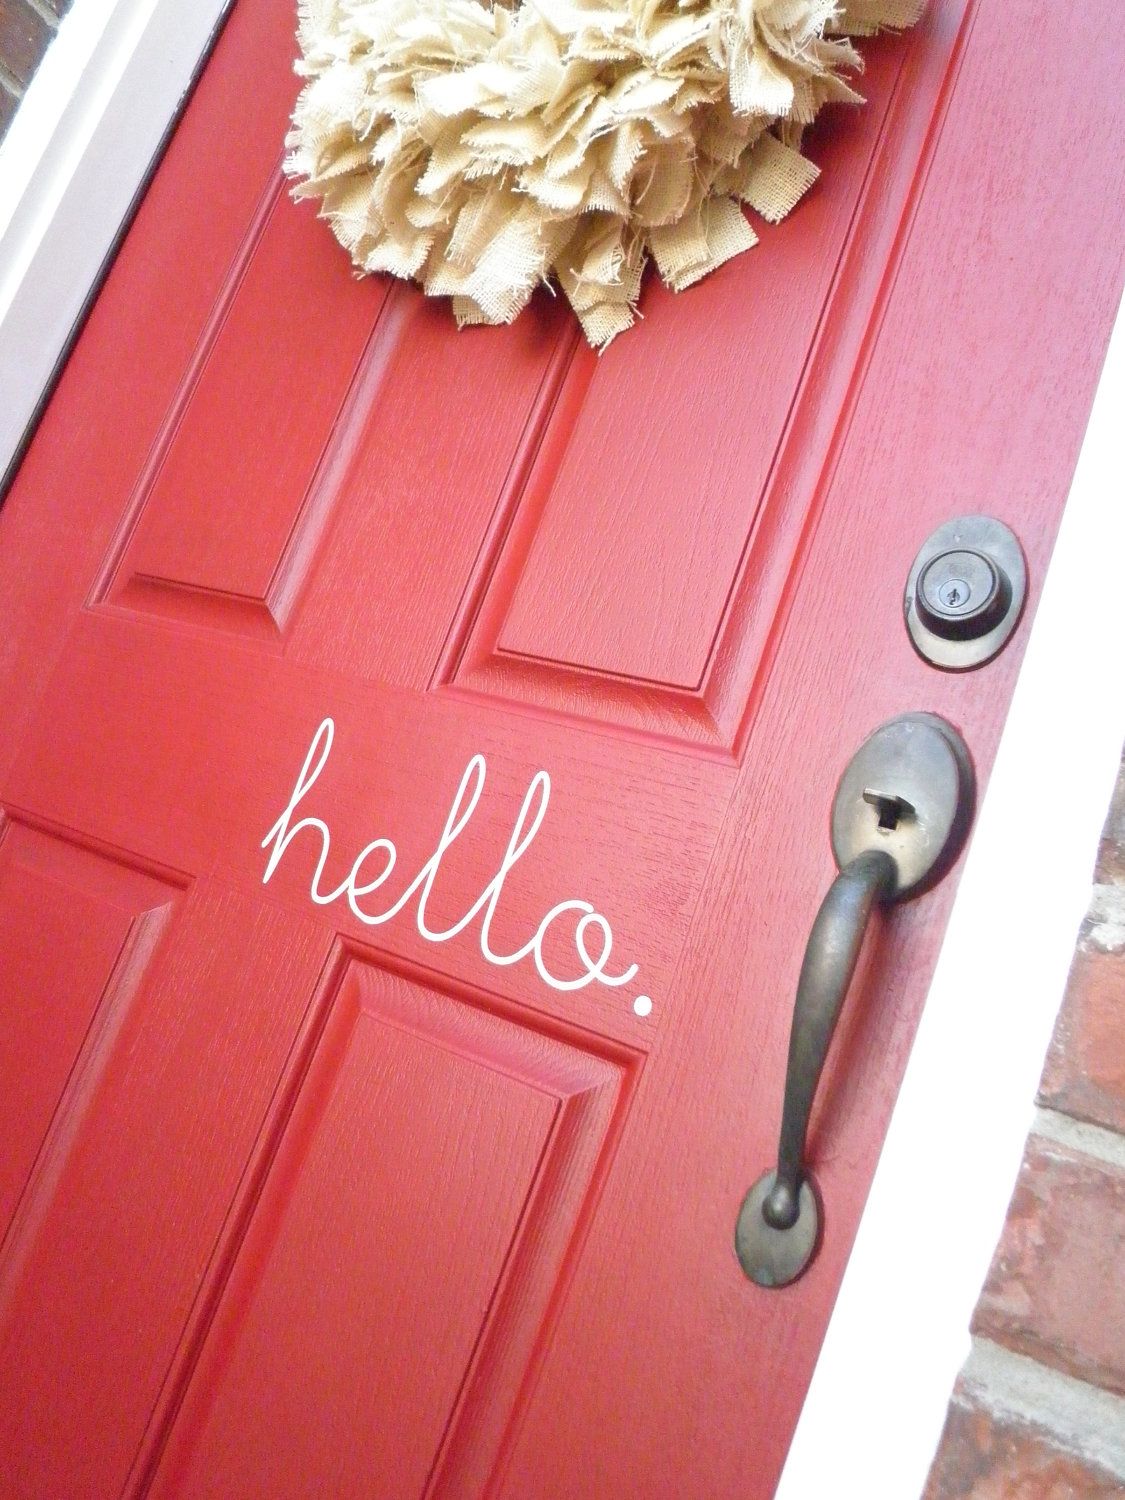 What a cute and happy front door. I love this!